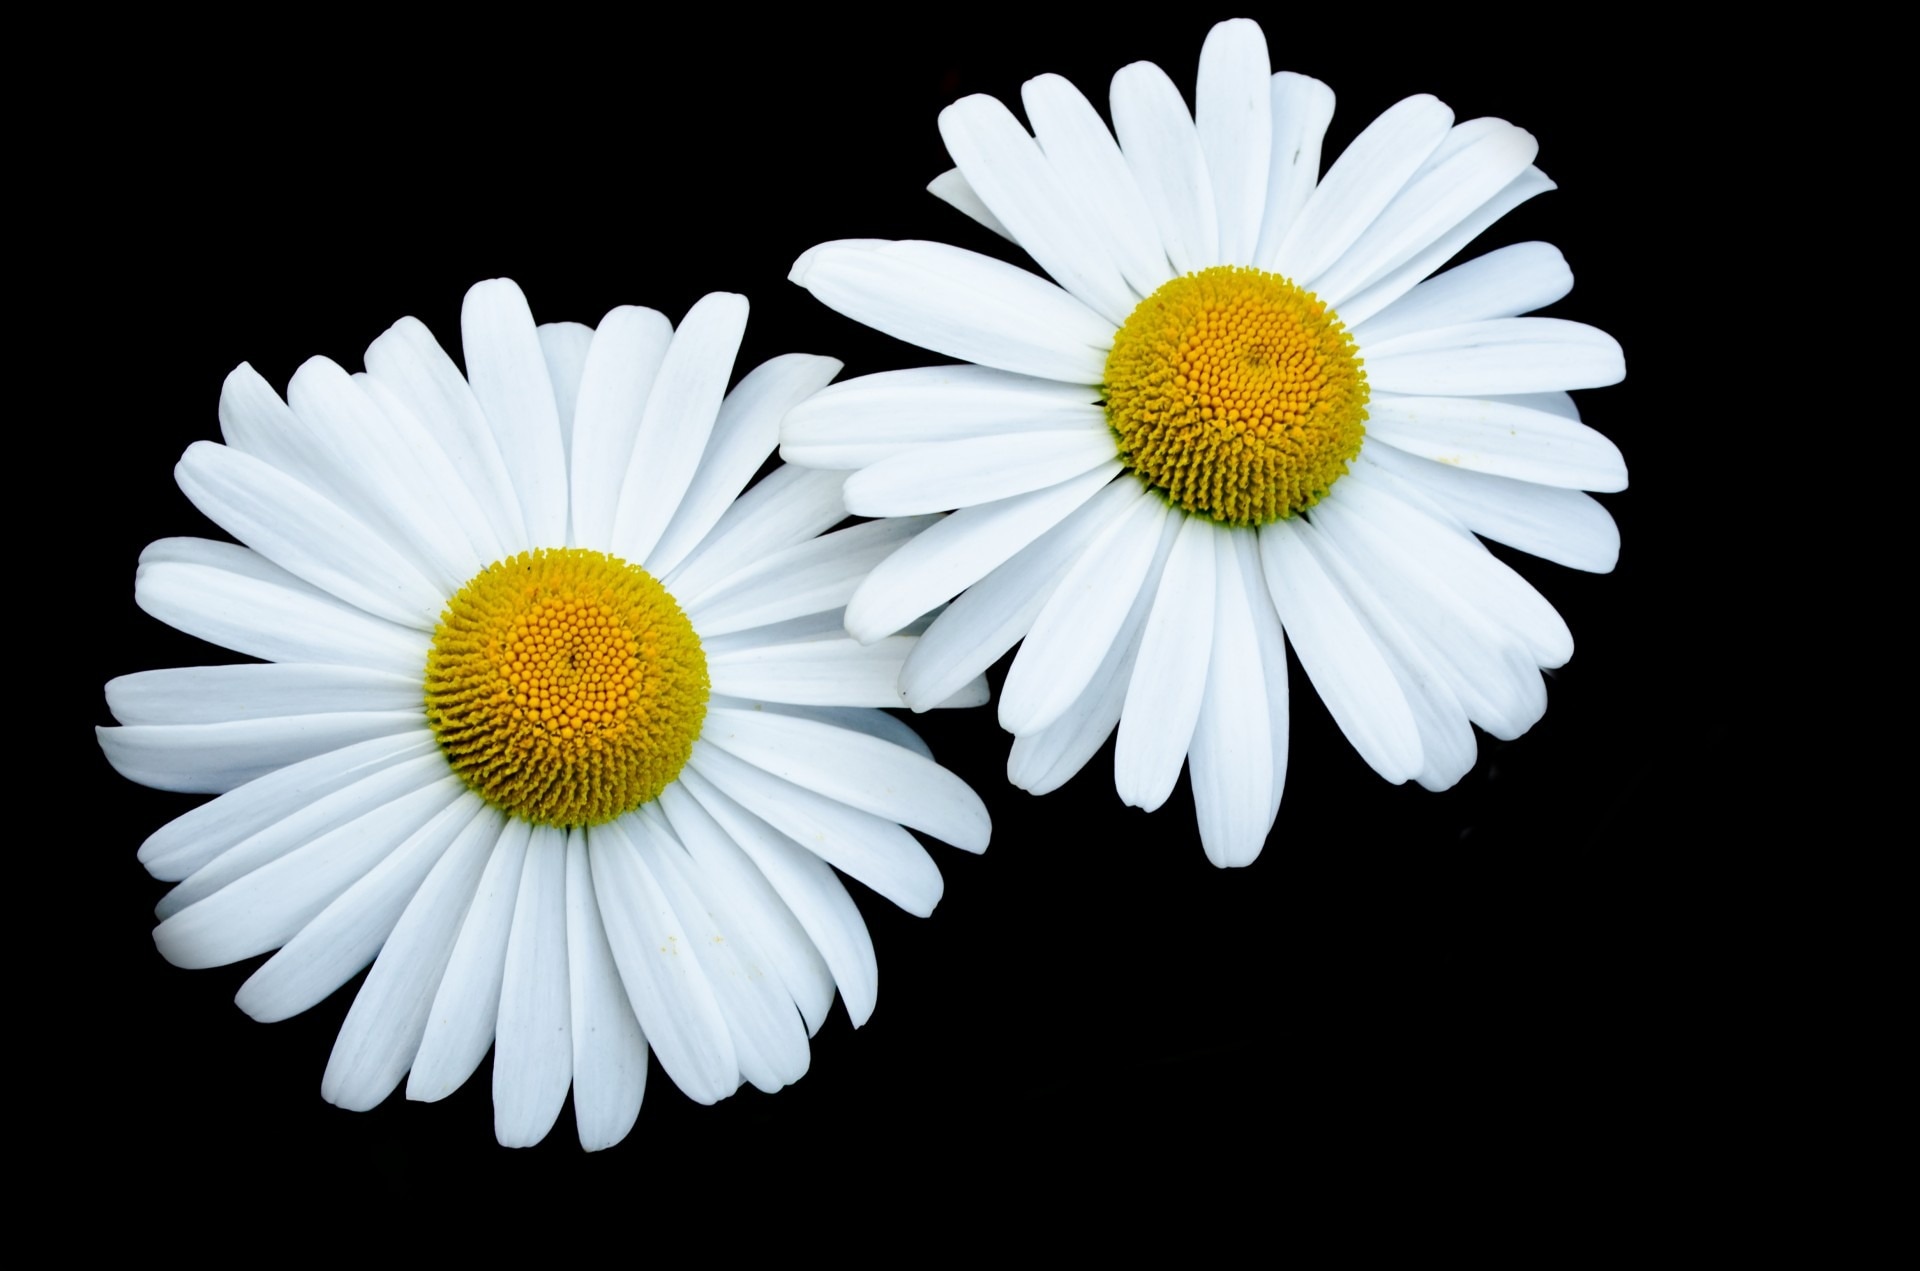 2 white and yellow daisy flowers